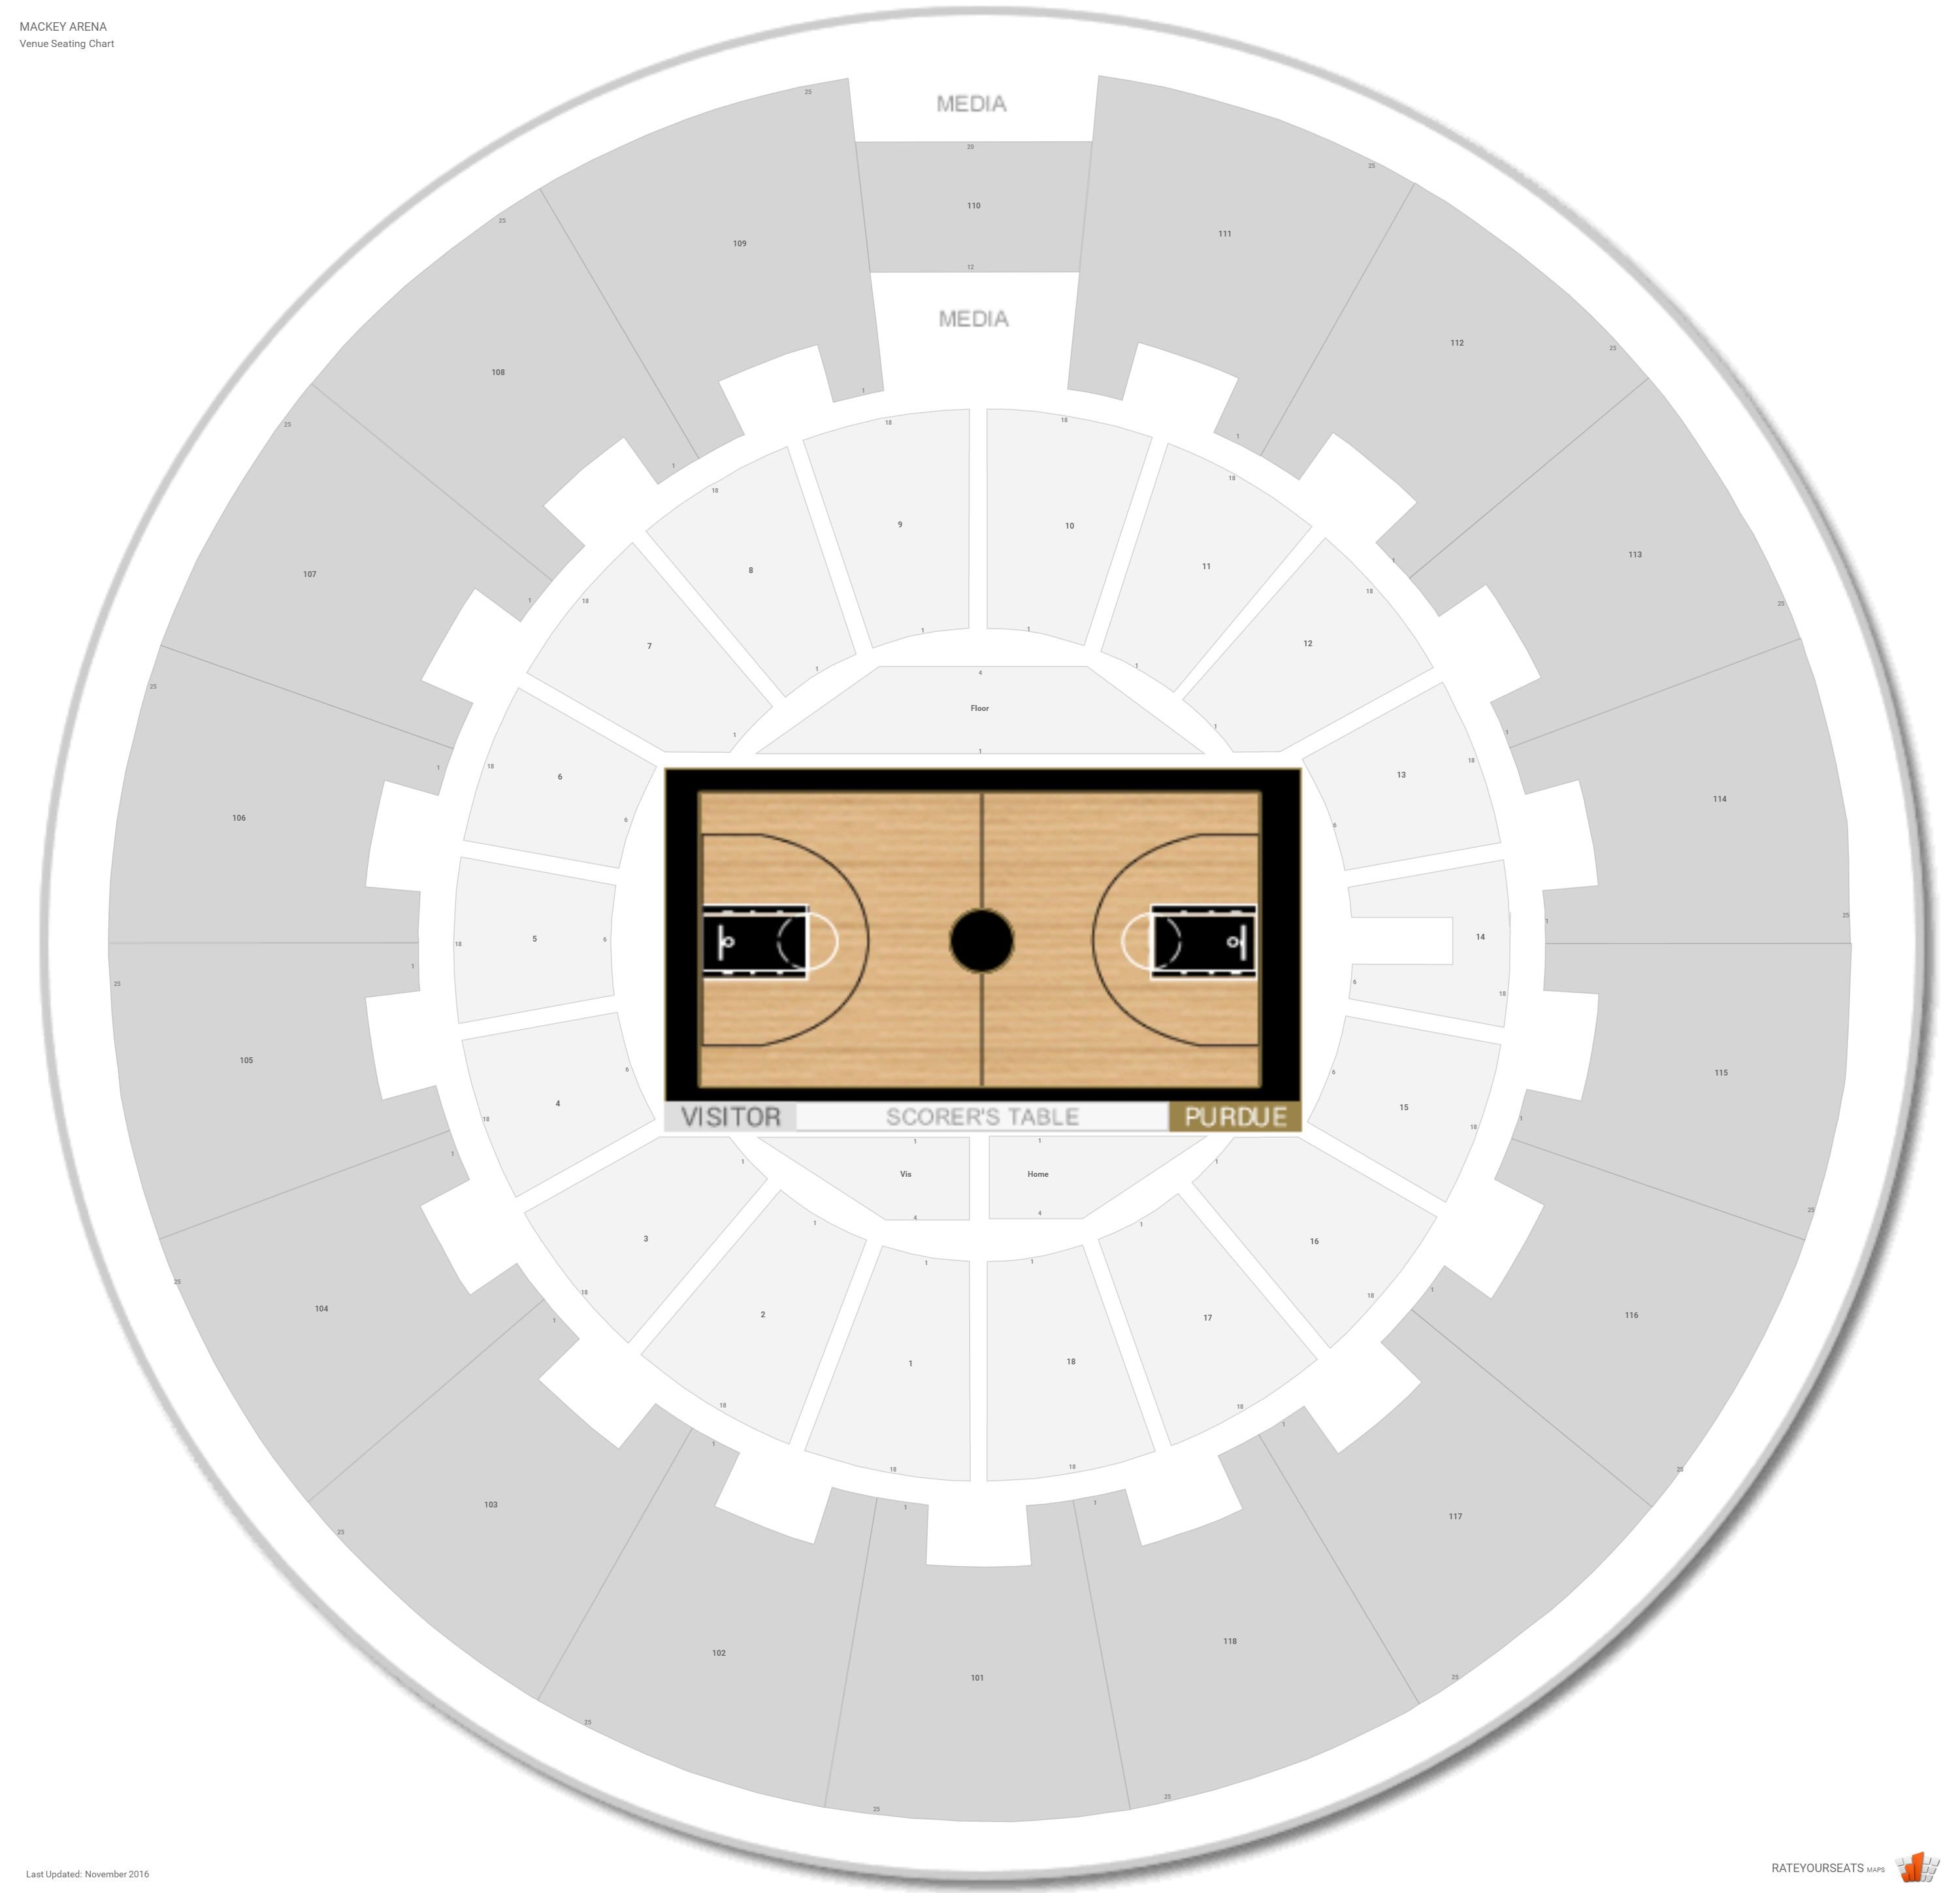 Mackey Arena Seating Chart With Seat Numbers